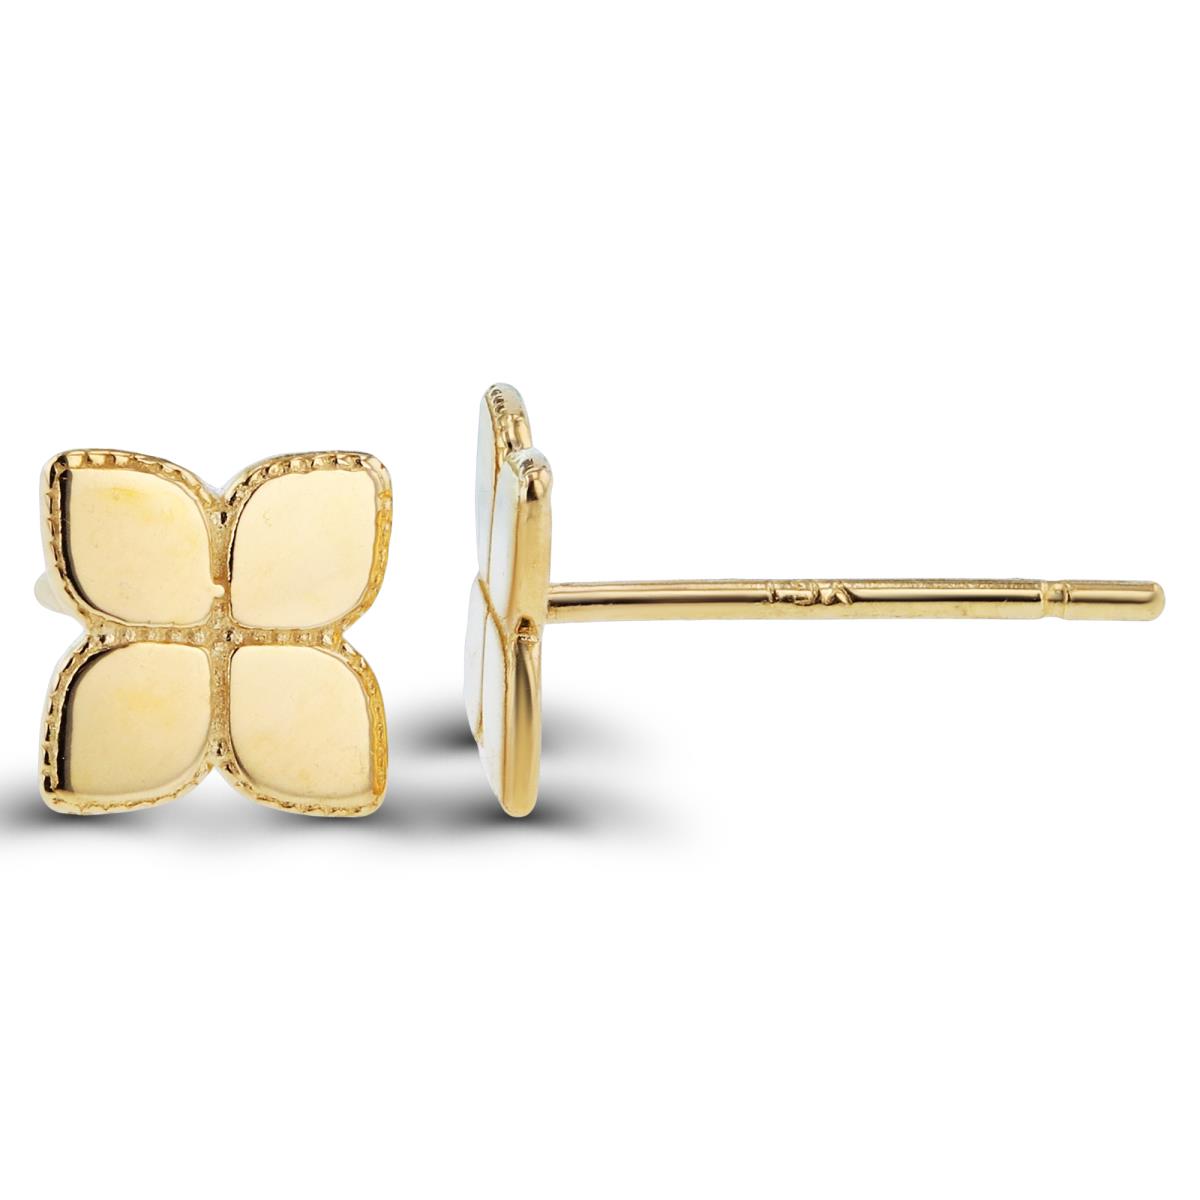 10K Yellow Gold High Polish & Textured Clover Studs with Silicon Backs